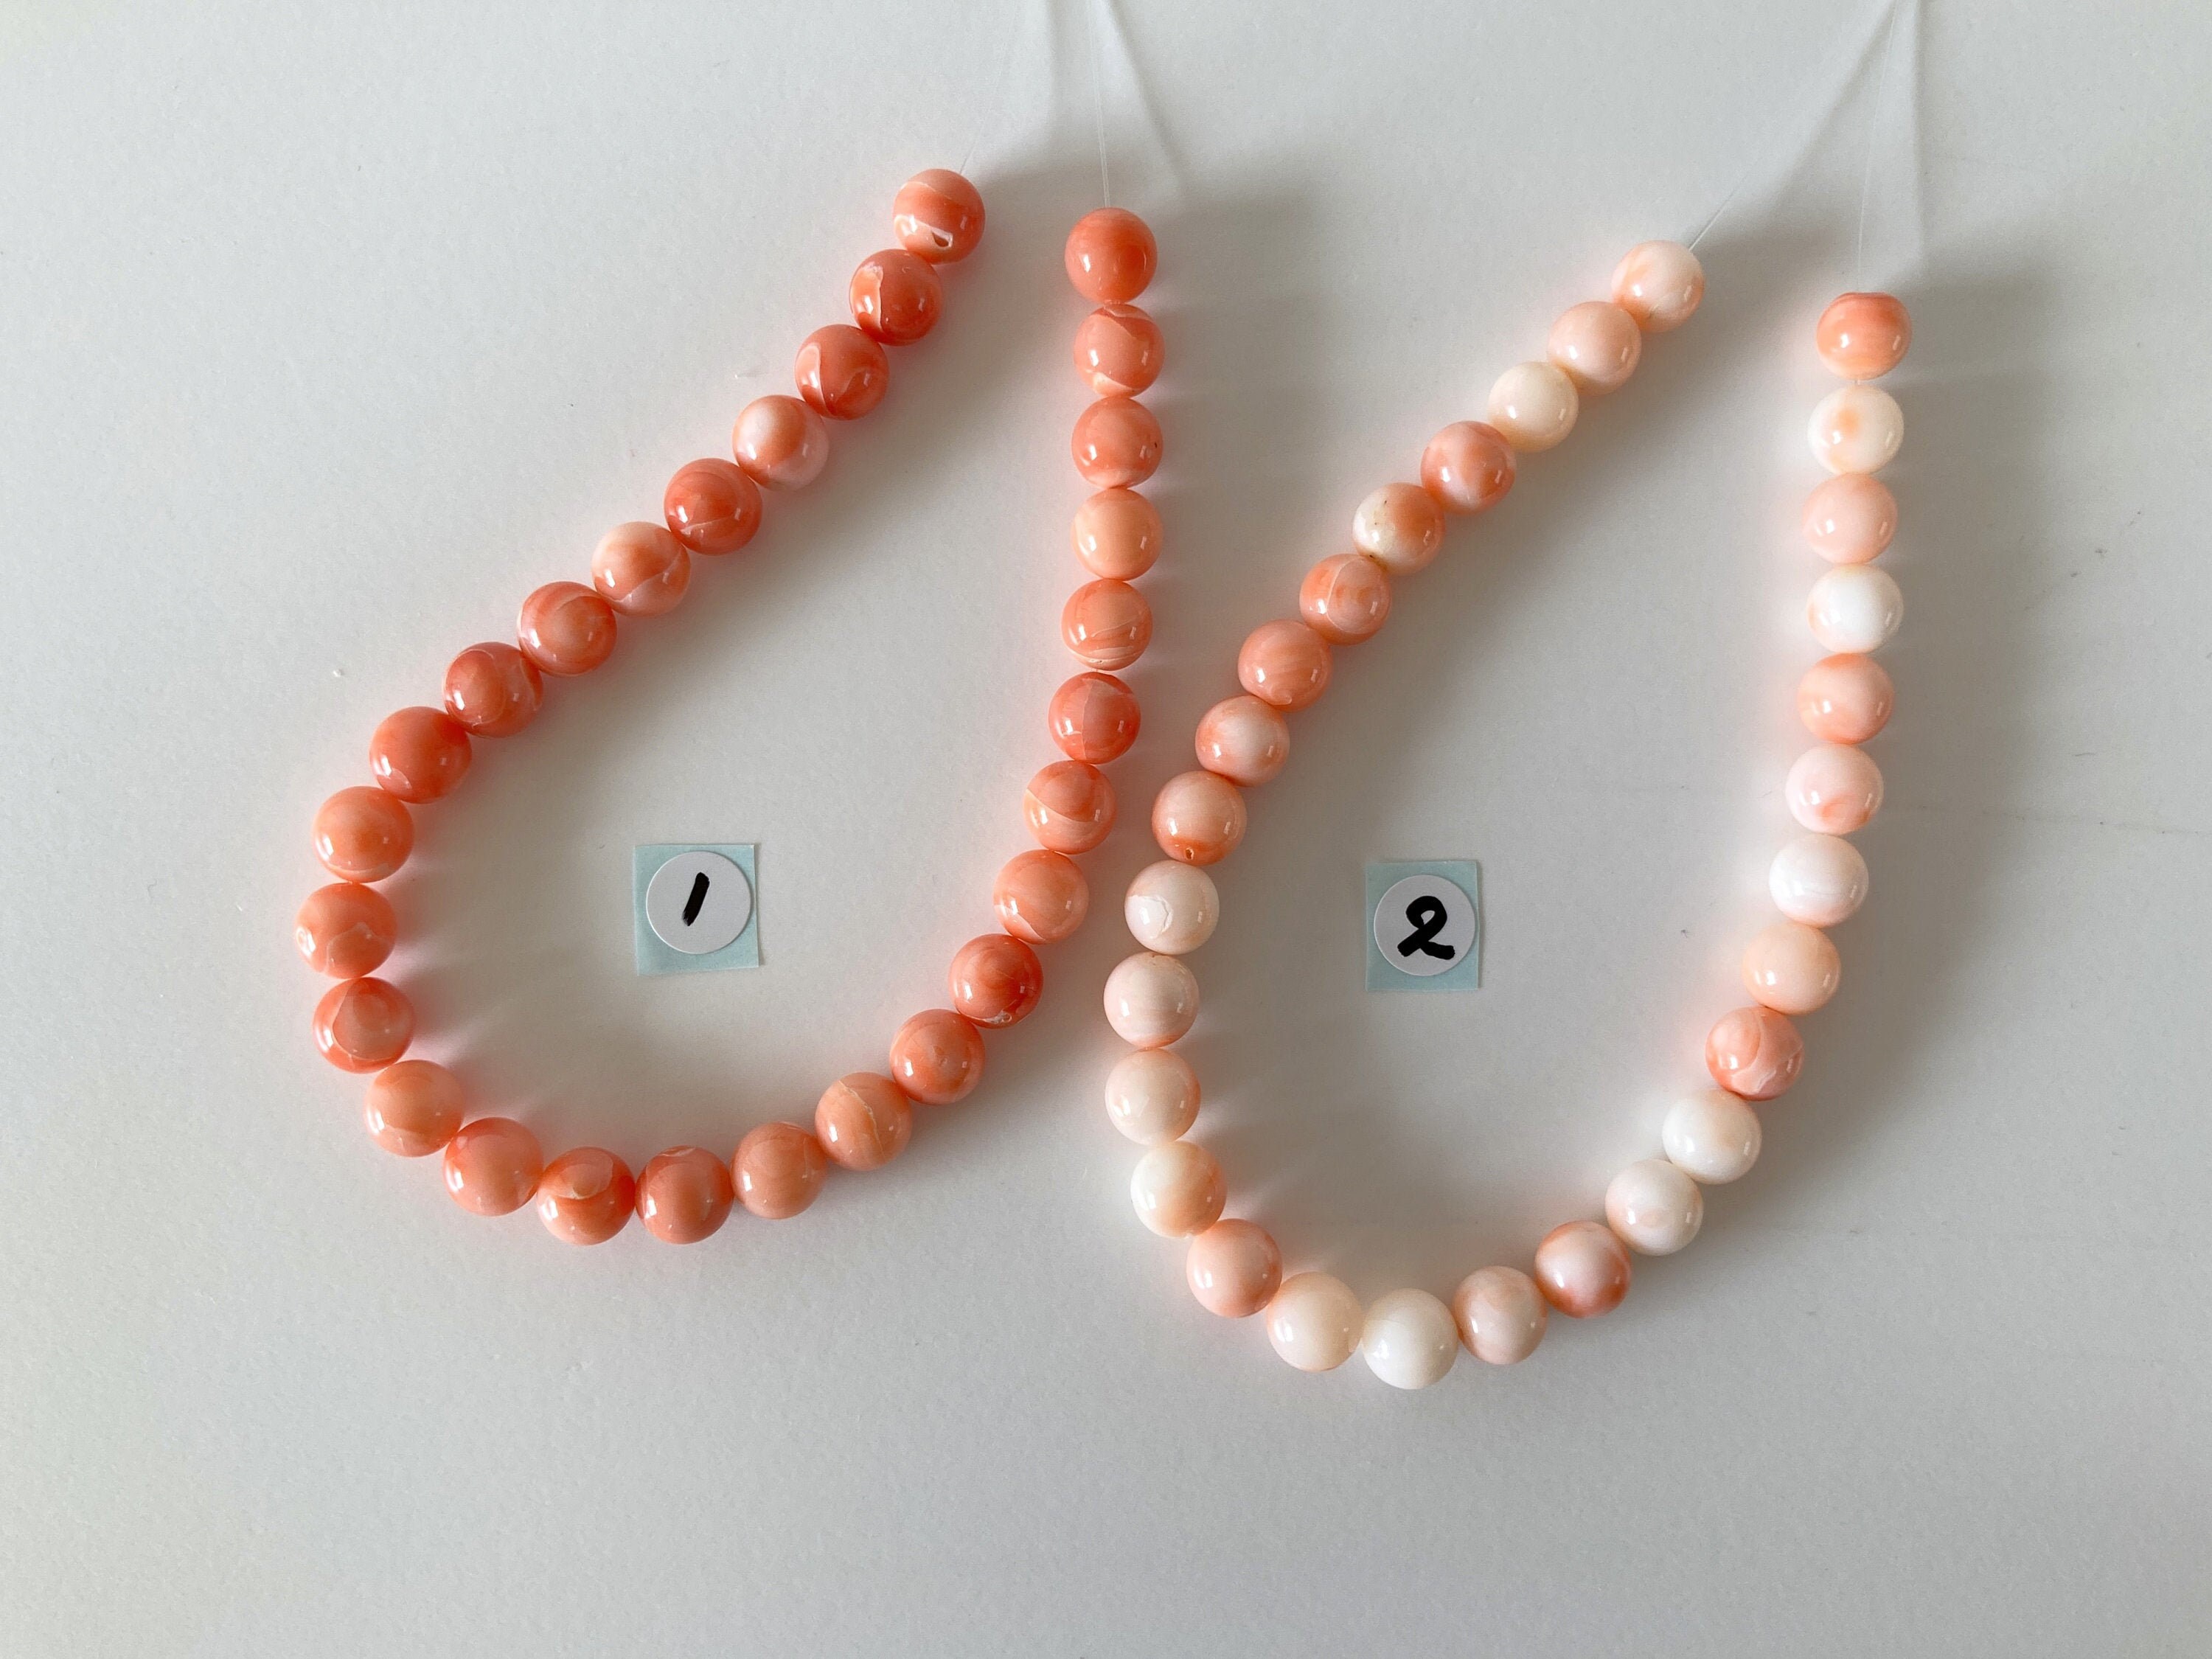 Price per strand Natural Deep Sea Coral 5-5.5mm round beads strand Natural color pinkorange coral round beads strand